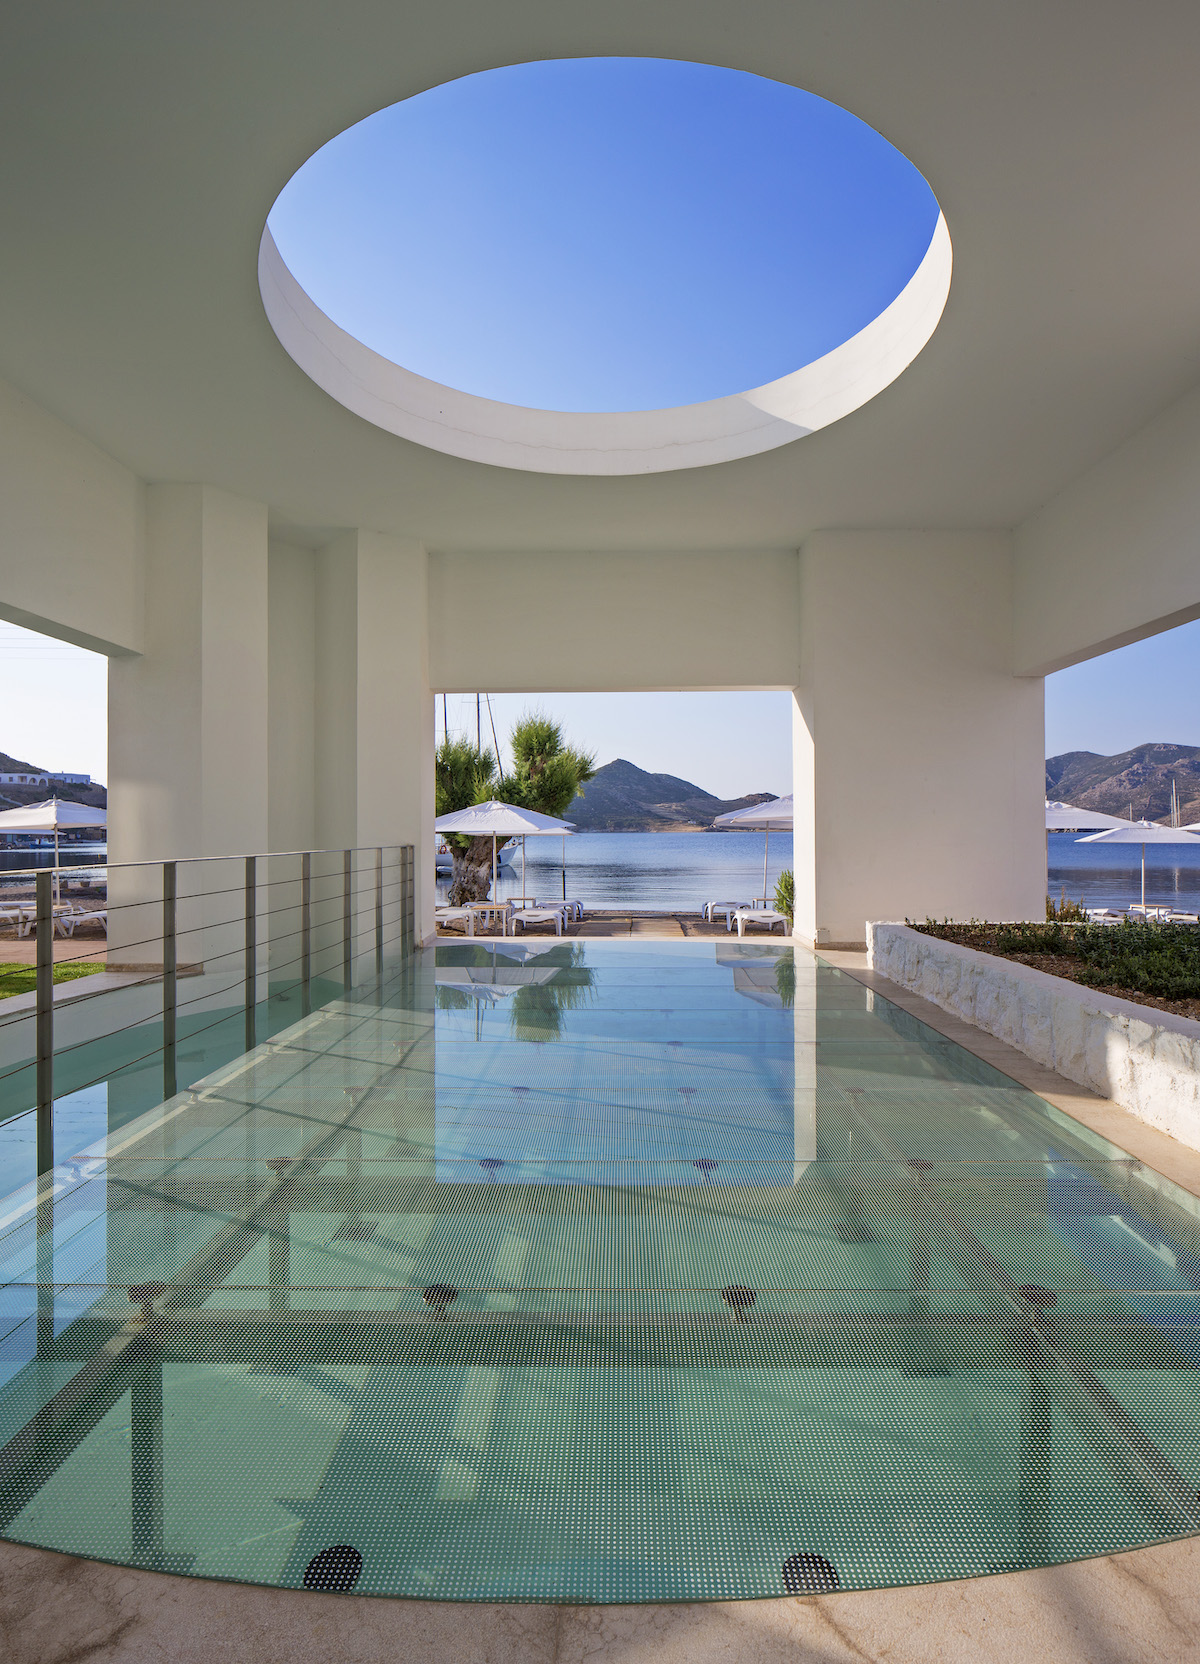 Pool overlooking ocean in greece wiht circle cut-out in architecture